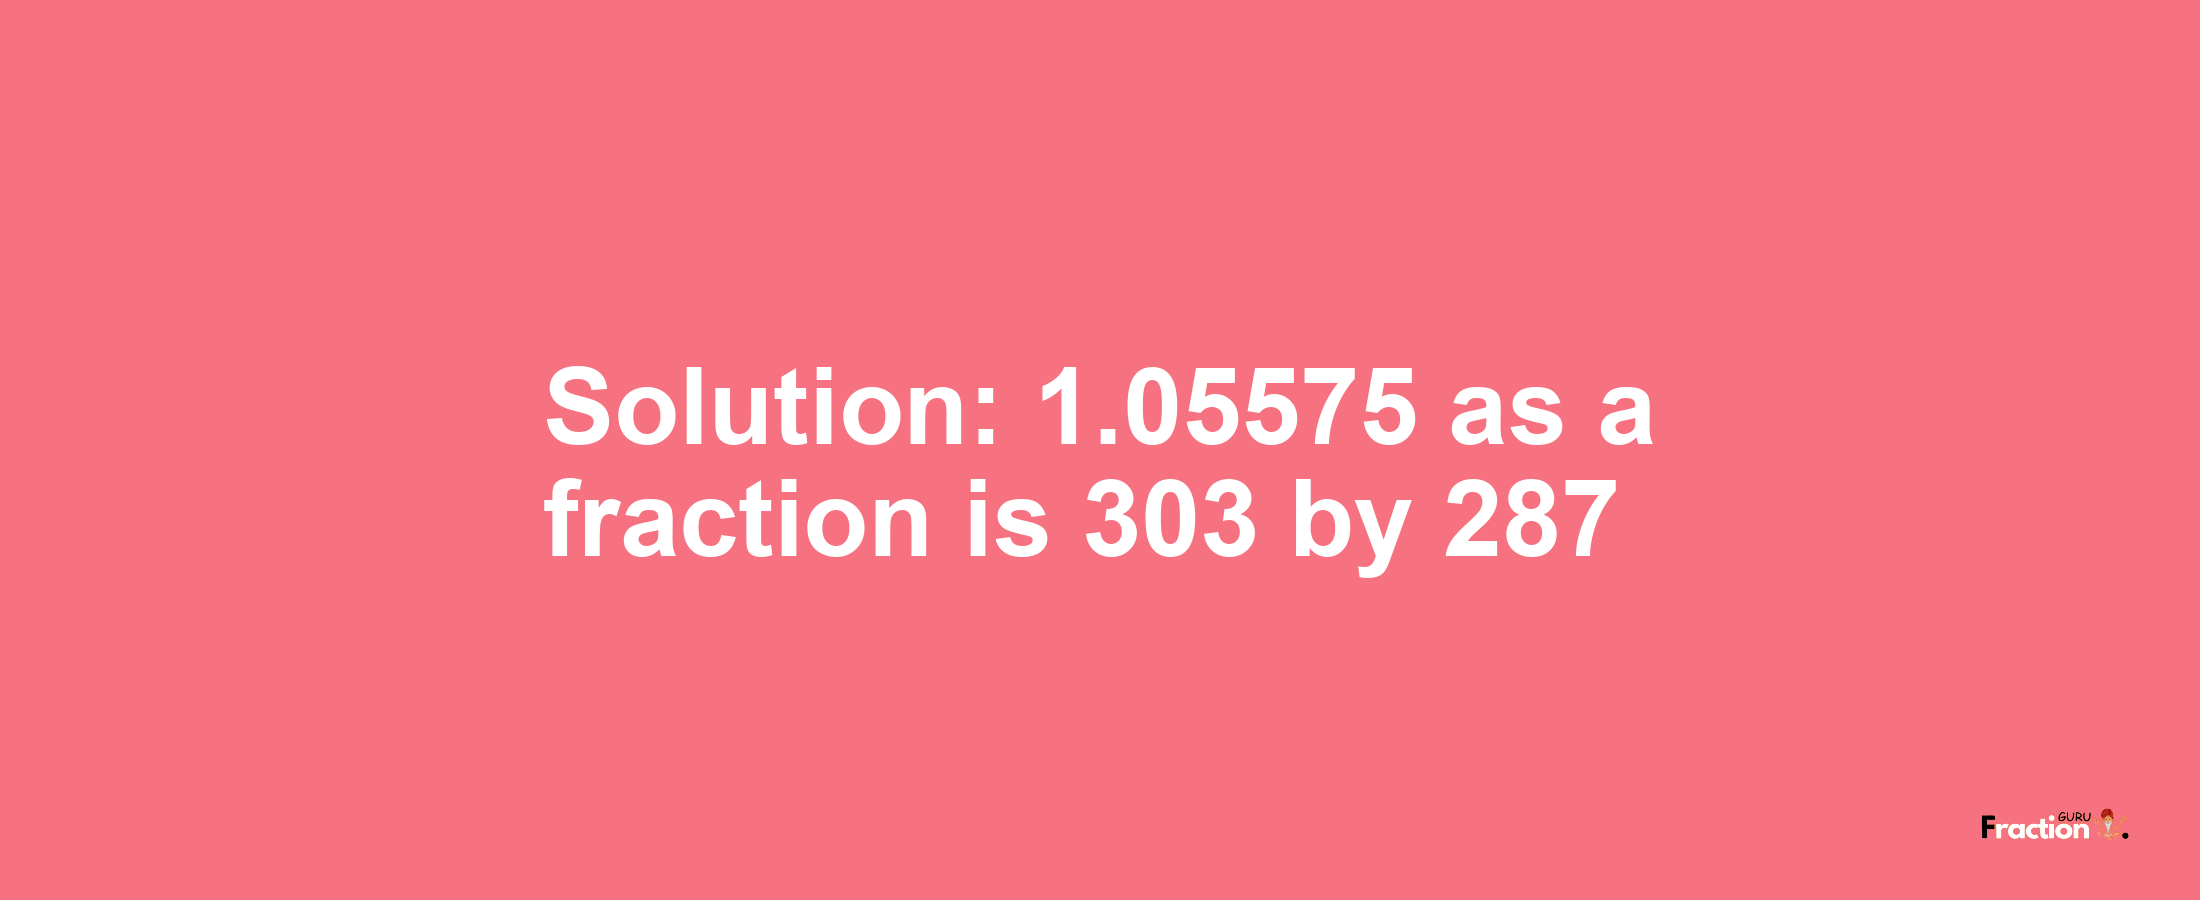 Solution:1.05575 as a fraction is 303/287